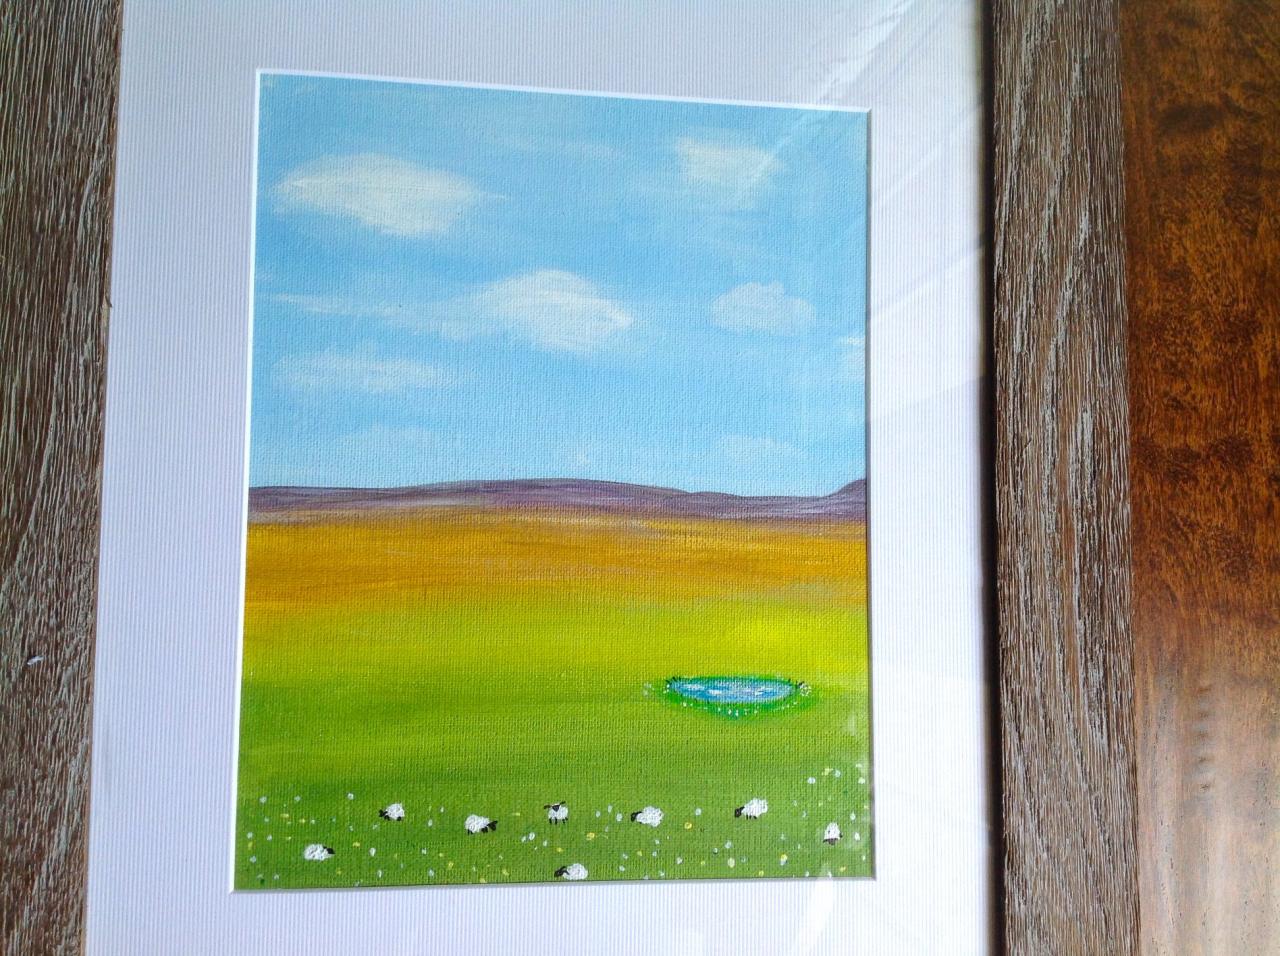 Small Canvas Painting, Landscape Painting/ Original Art On Canvas/ Small Art/ Sheep/ Landscape/ Art/ Mountains/ Small Home Decor/ Small Artwork/